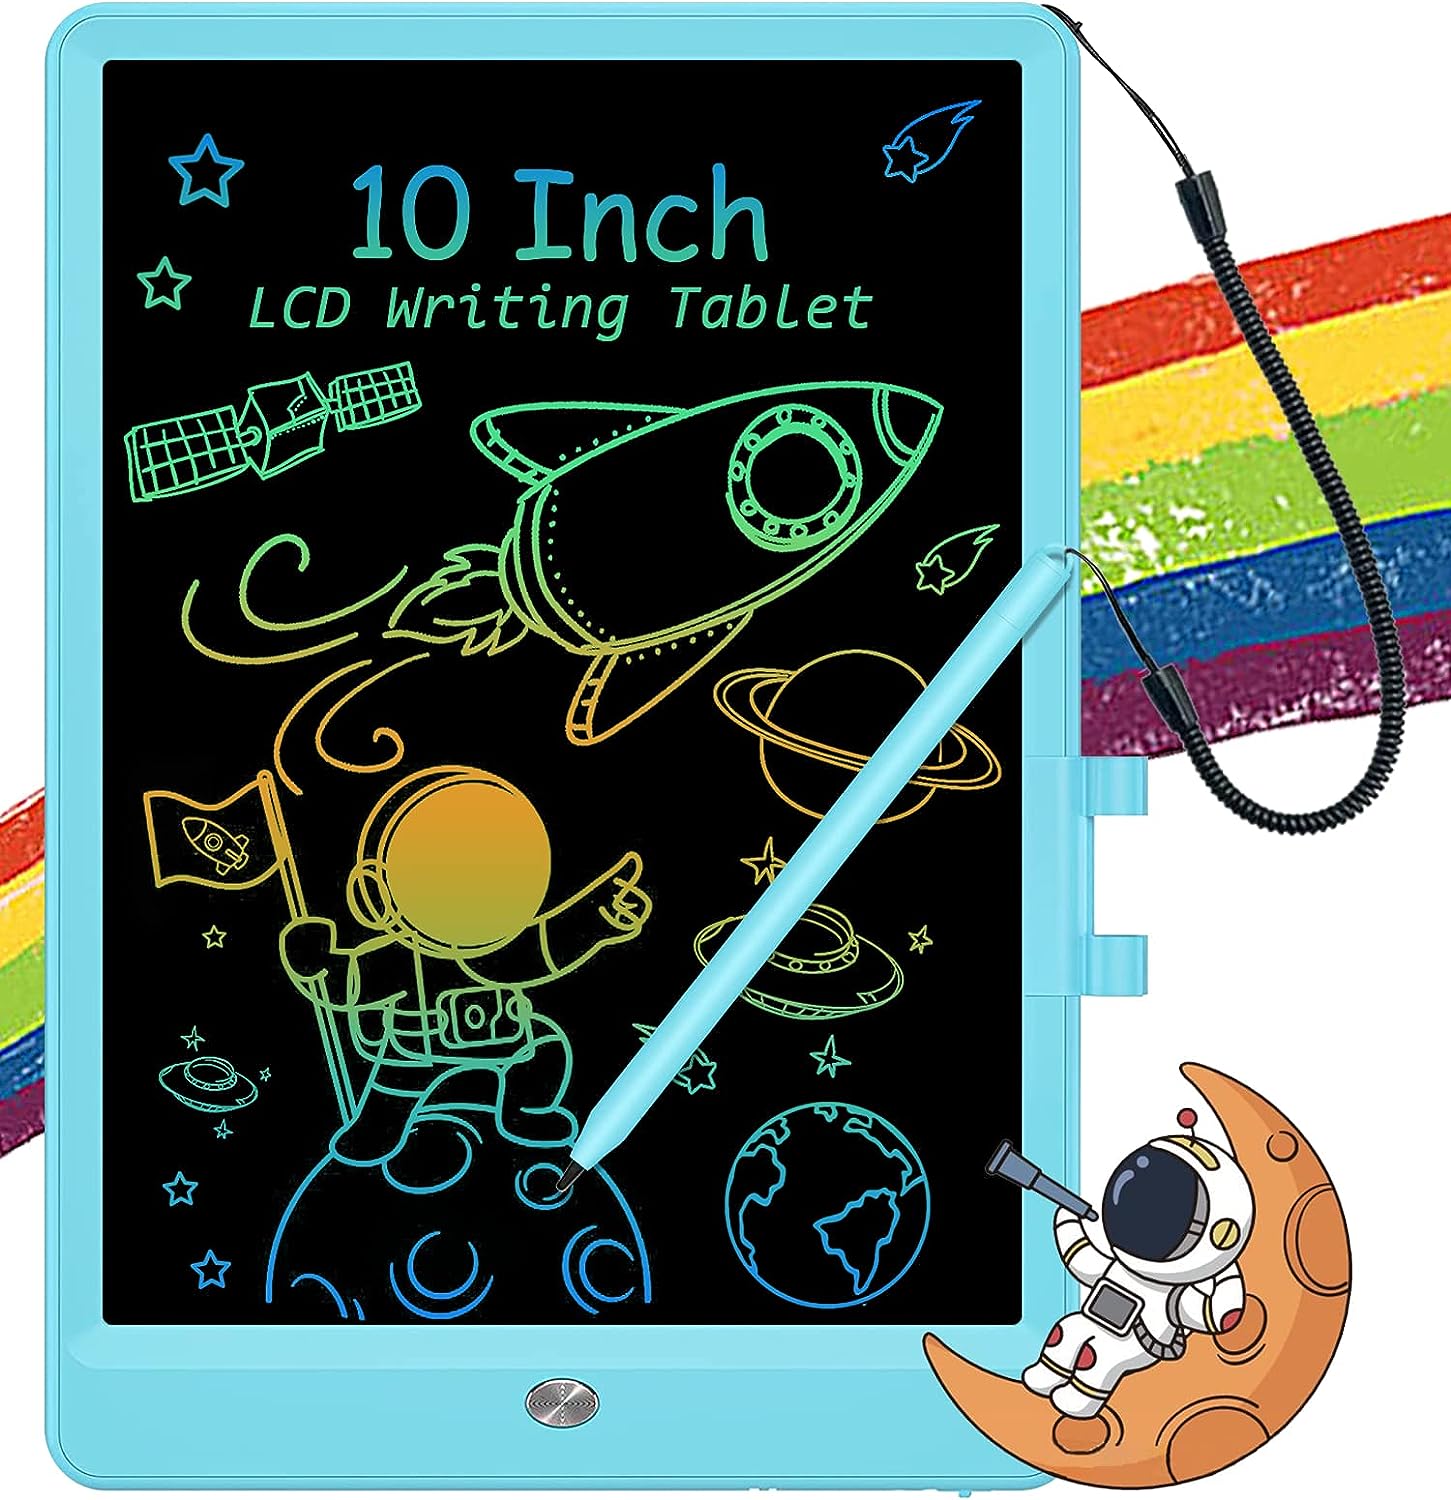 LCD Writing Tablet for Kids, 10 Inch Electronic Doodle [...]